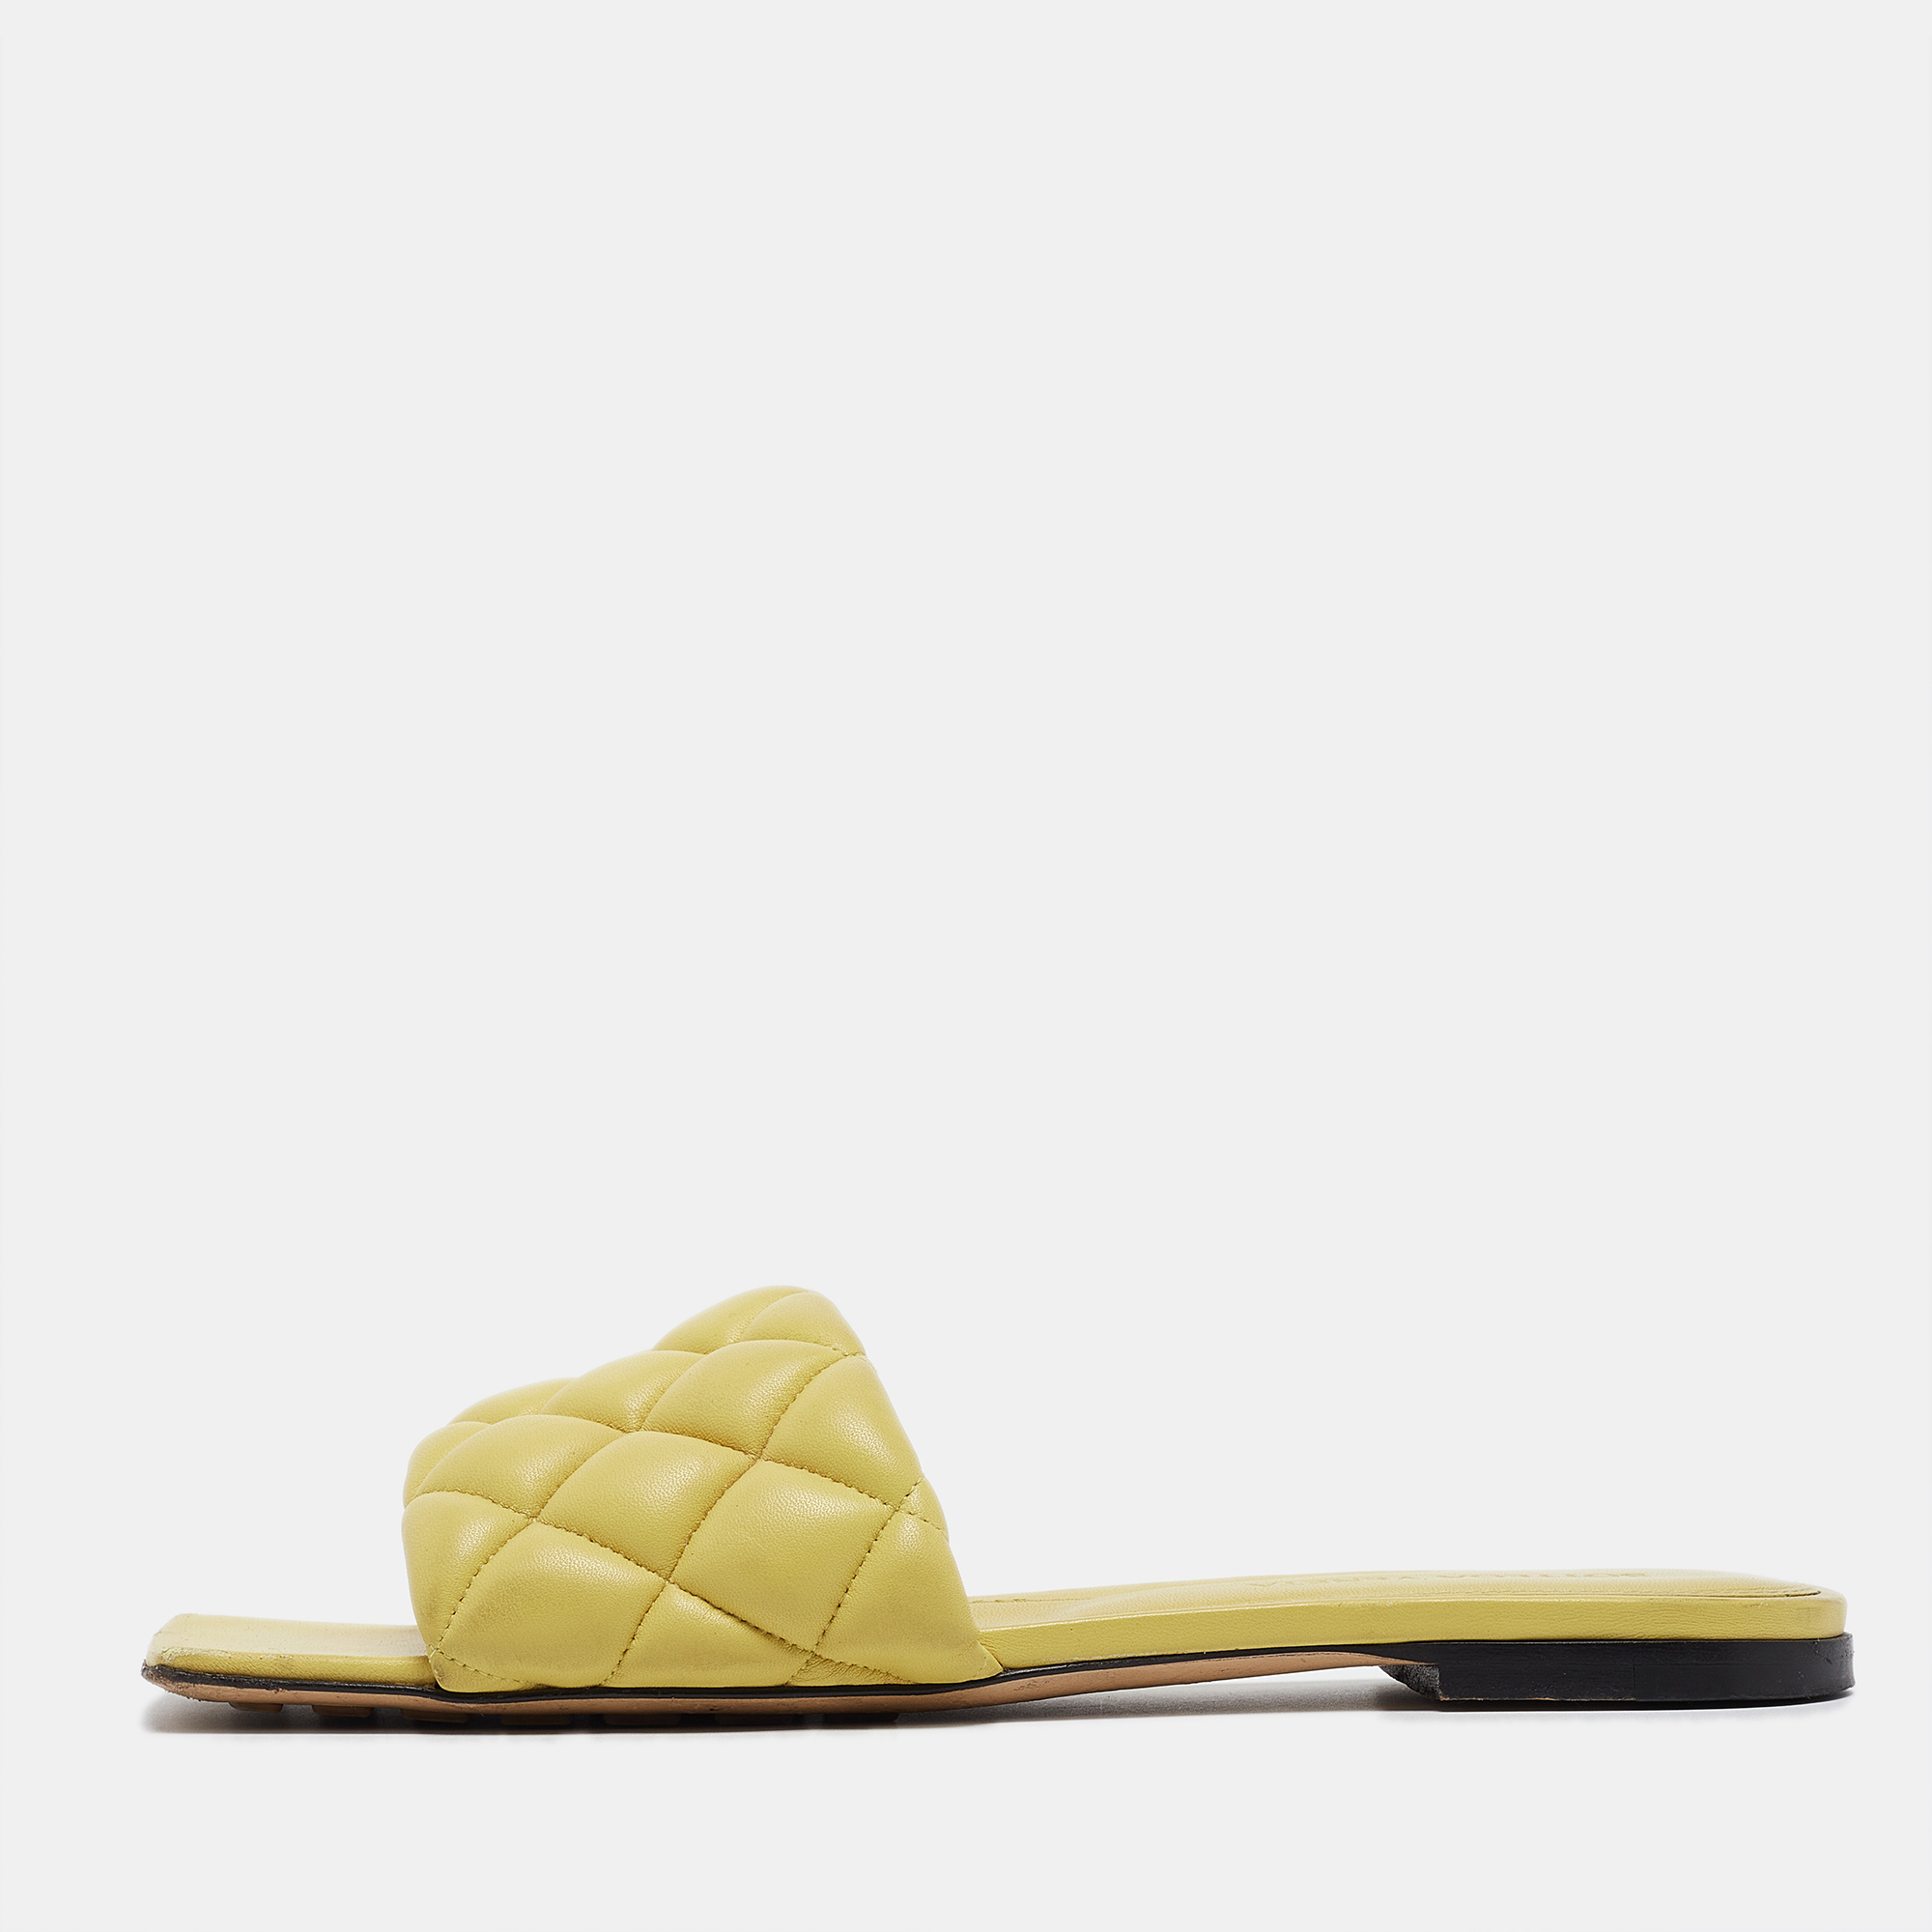 Pre-owned Bottega Veneta Yellow Quilted Leather Flat Slides Size 37